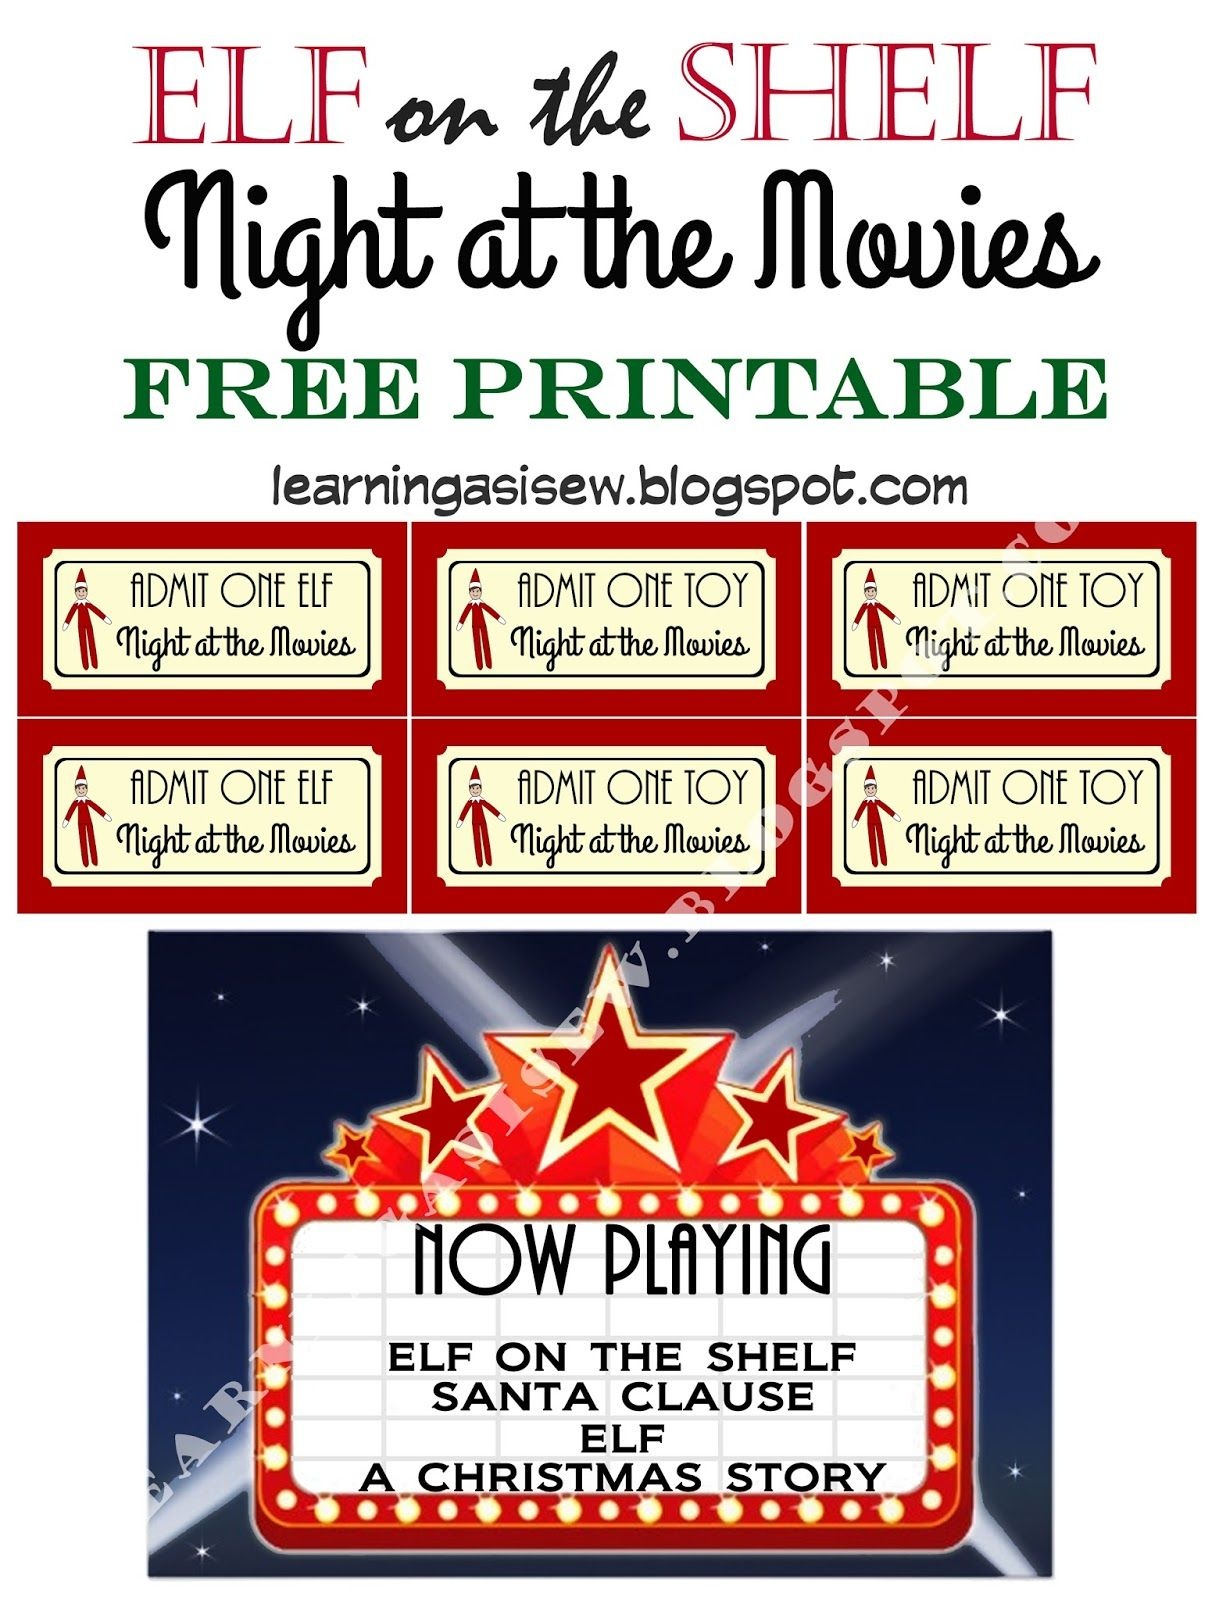 Elf On The Shelf Free Printable - Night At The Movies, Printable - Elf On The Shelf Printable Props Free